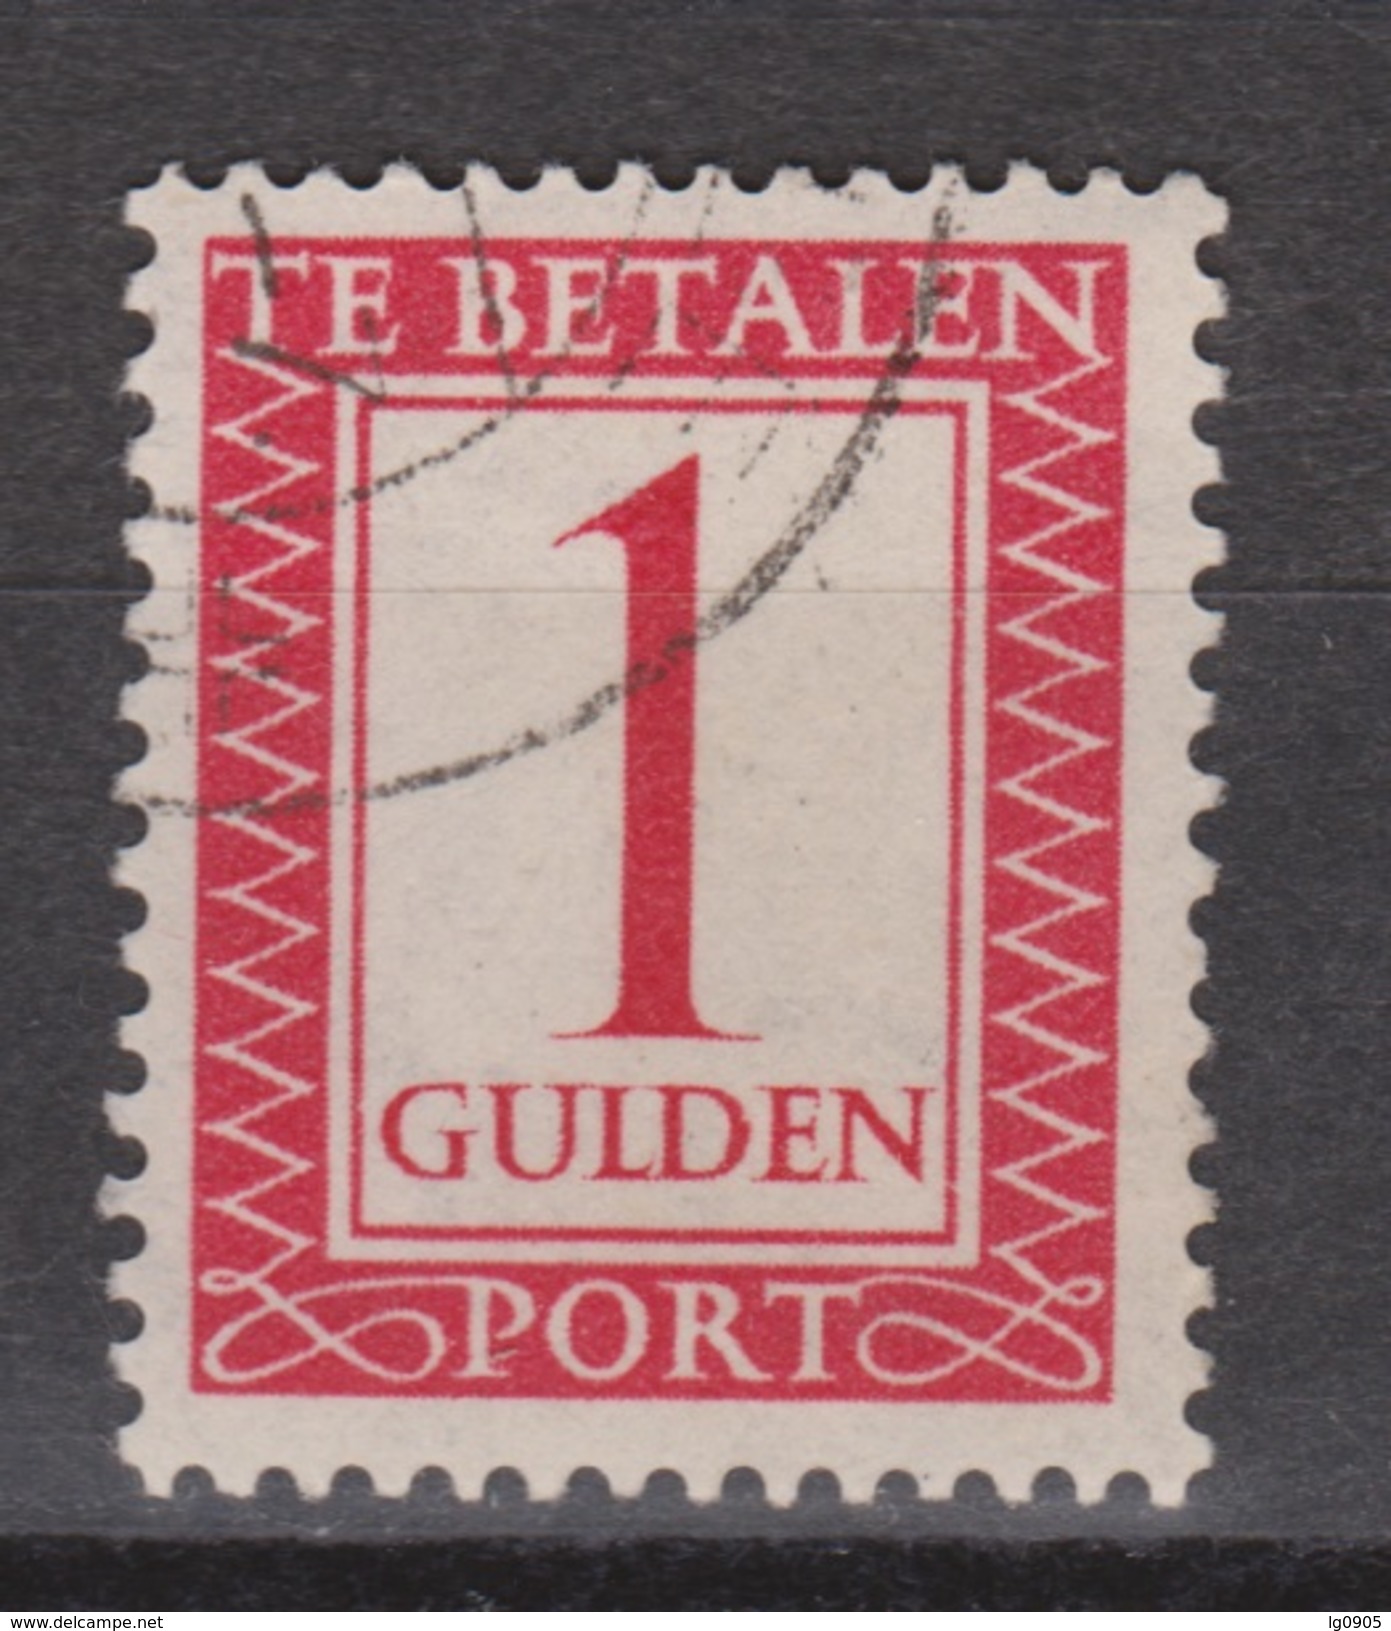 NVPH Nederland Netherlands Holanda Pays Bas Port 105 Used Timbre-taxe, Postmarke, Sellos De Correos NOW MANY DUE STAMPS - Postage Due